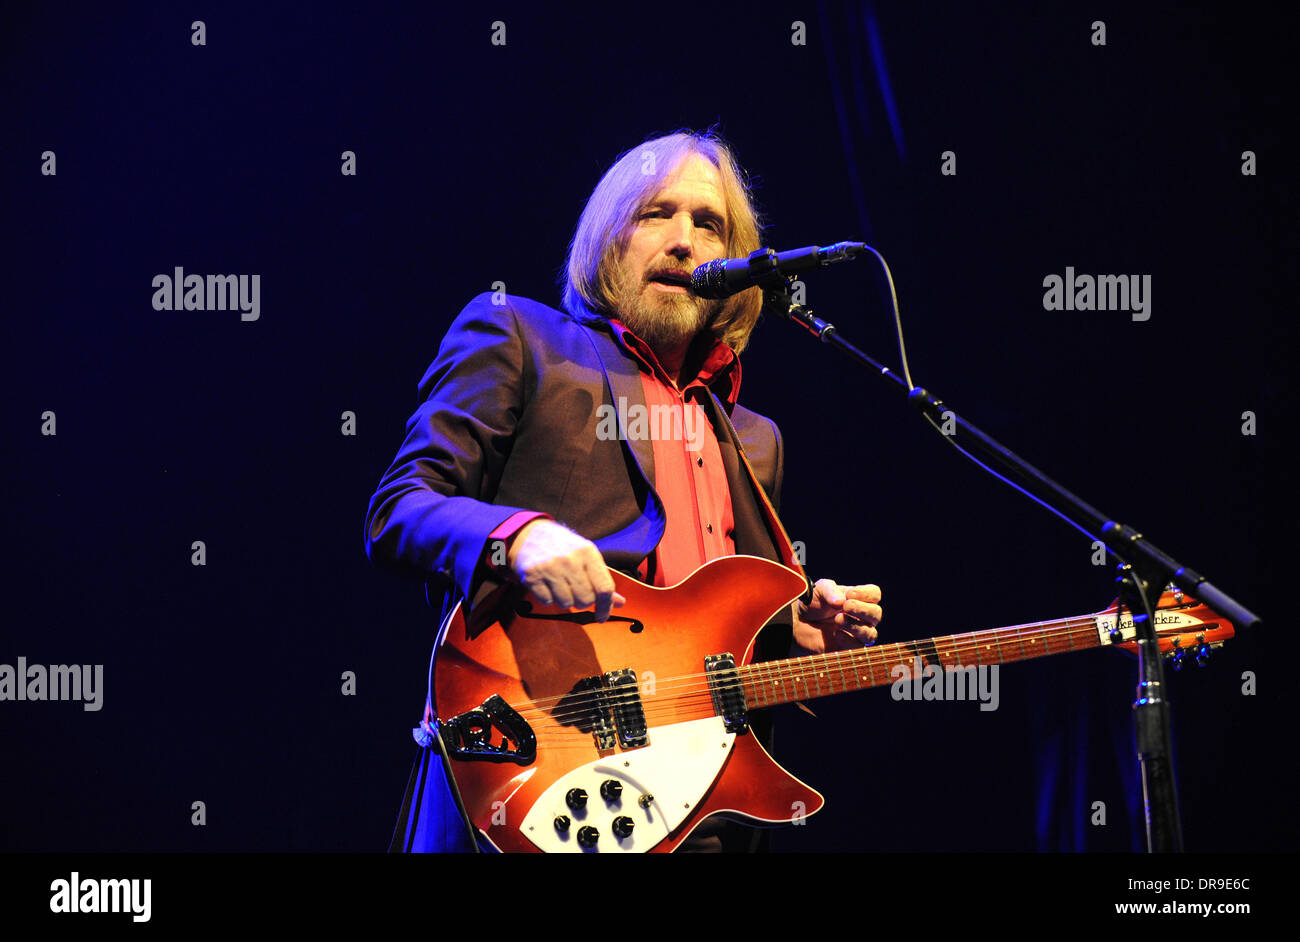 Tom Petty & the Heartbreakers performing at the Heineken Music Hall Amsterdam, Holland - 24.06.12 Stock Photo